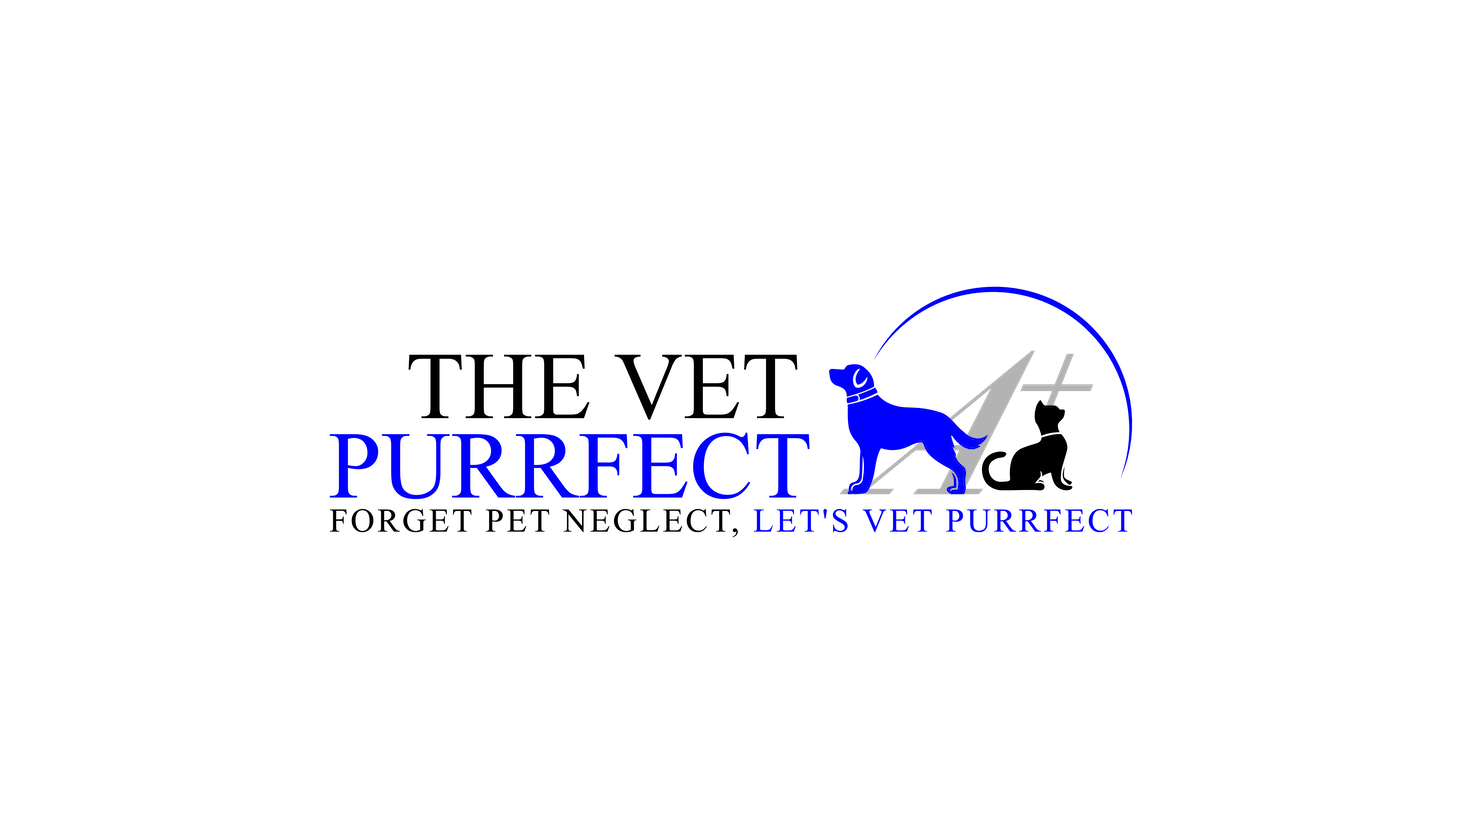 Vet Purrfect logo and slogan aiming to keep pets happy and healthy.